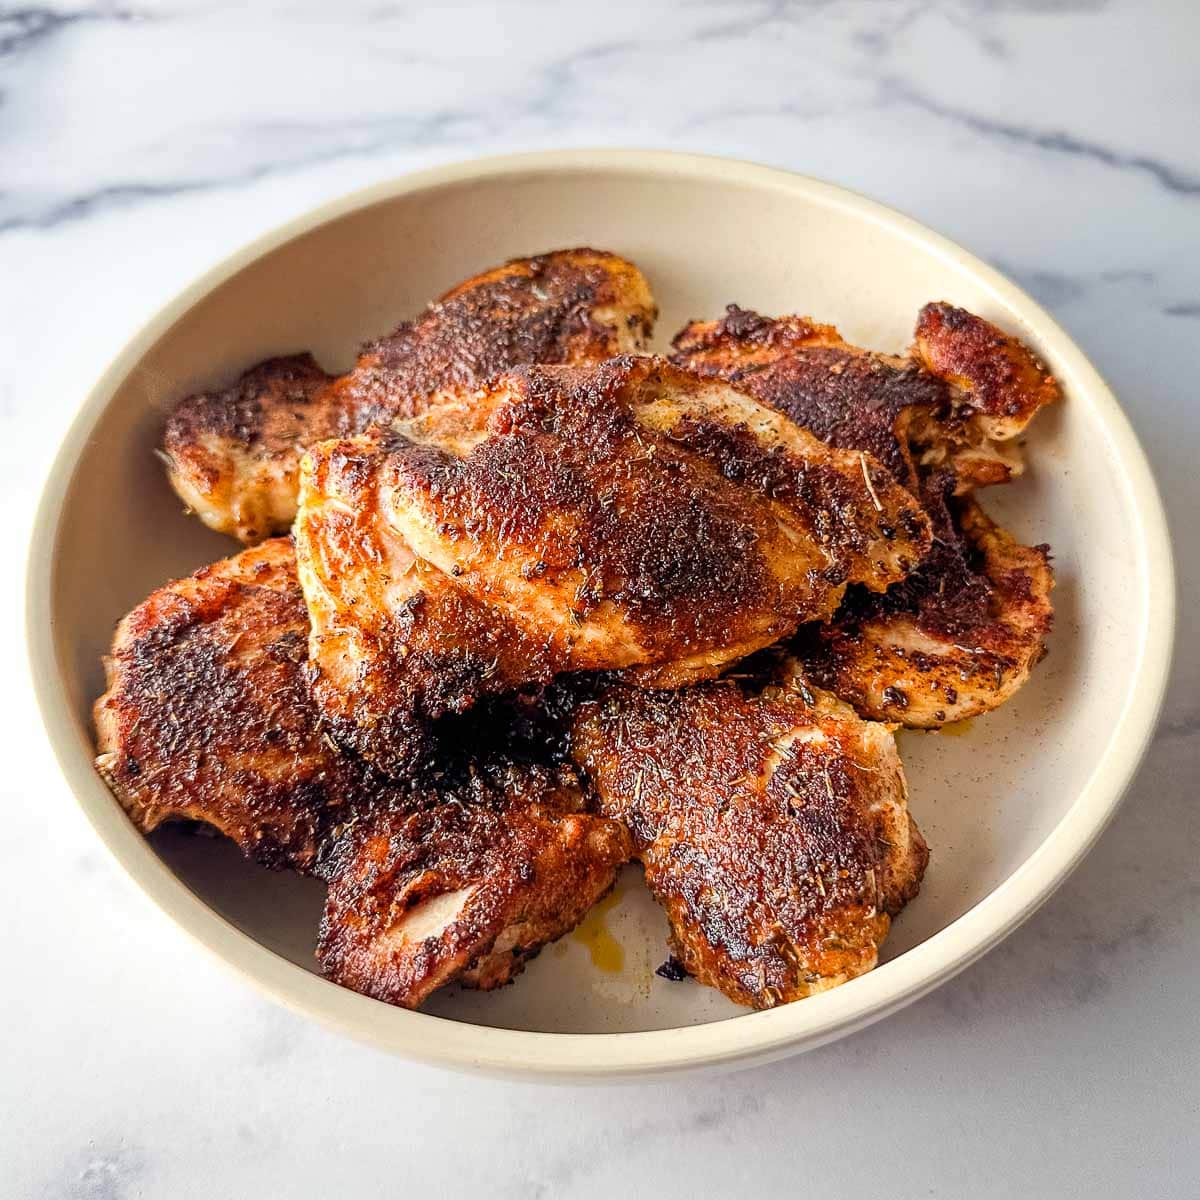 Blackened chicken thighs in a bowl on a marble table.